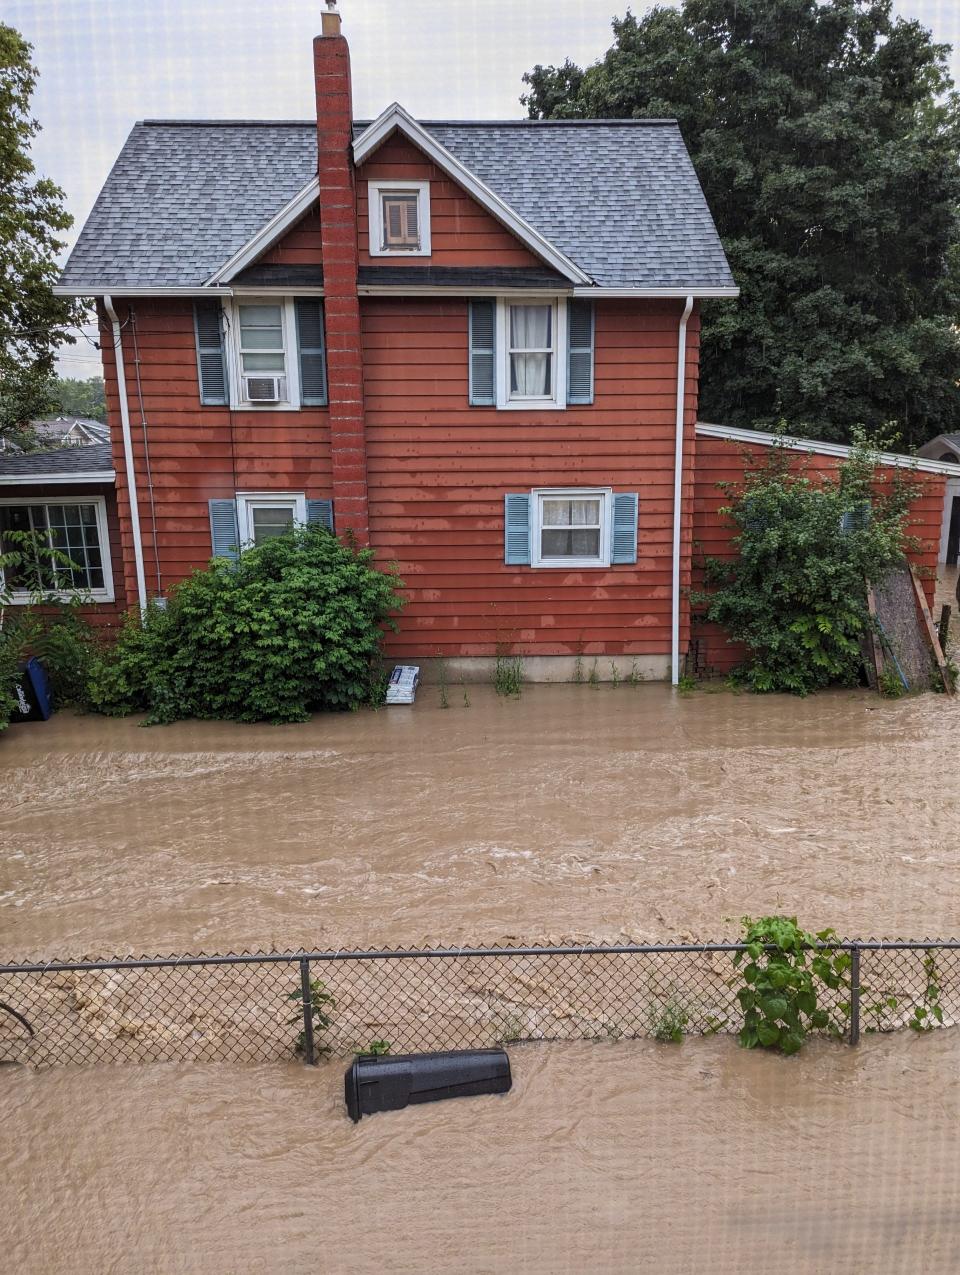 Flood waters rise on Sunday at this West Gibson Street, Canandaigua home.